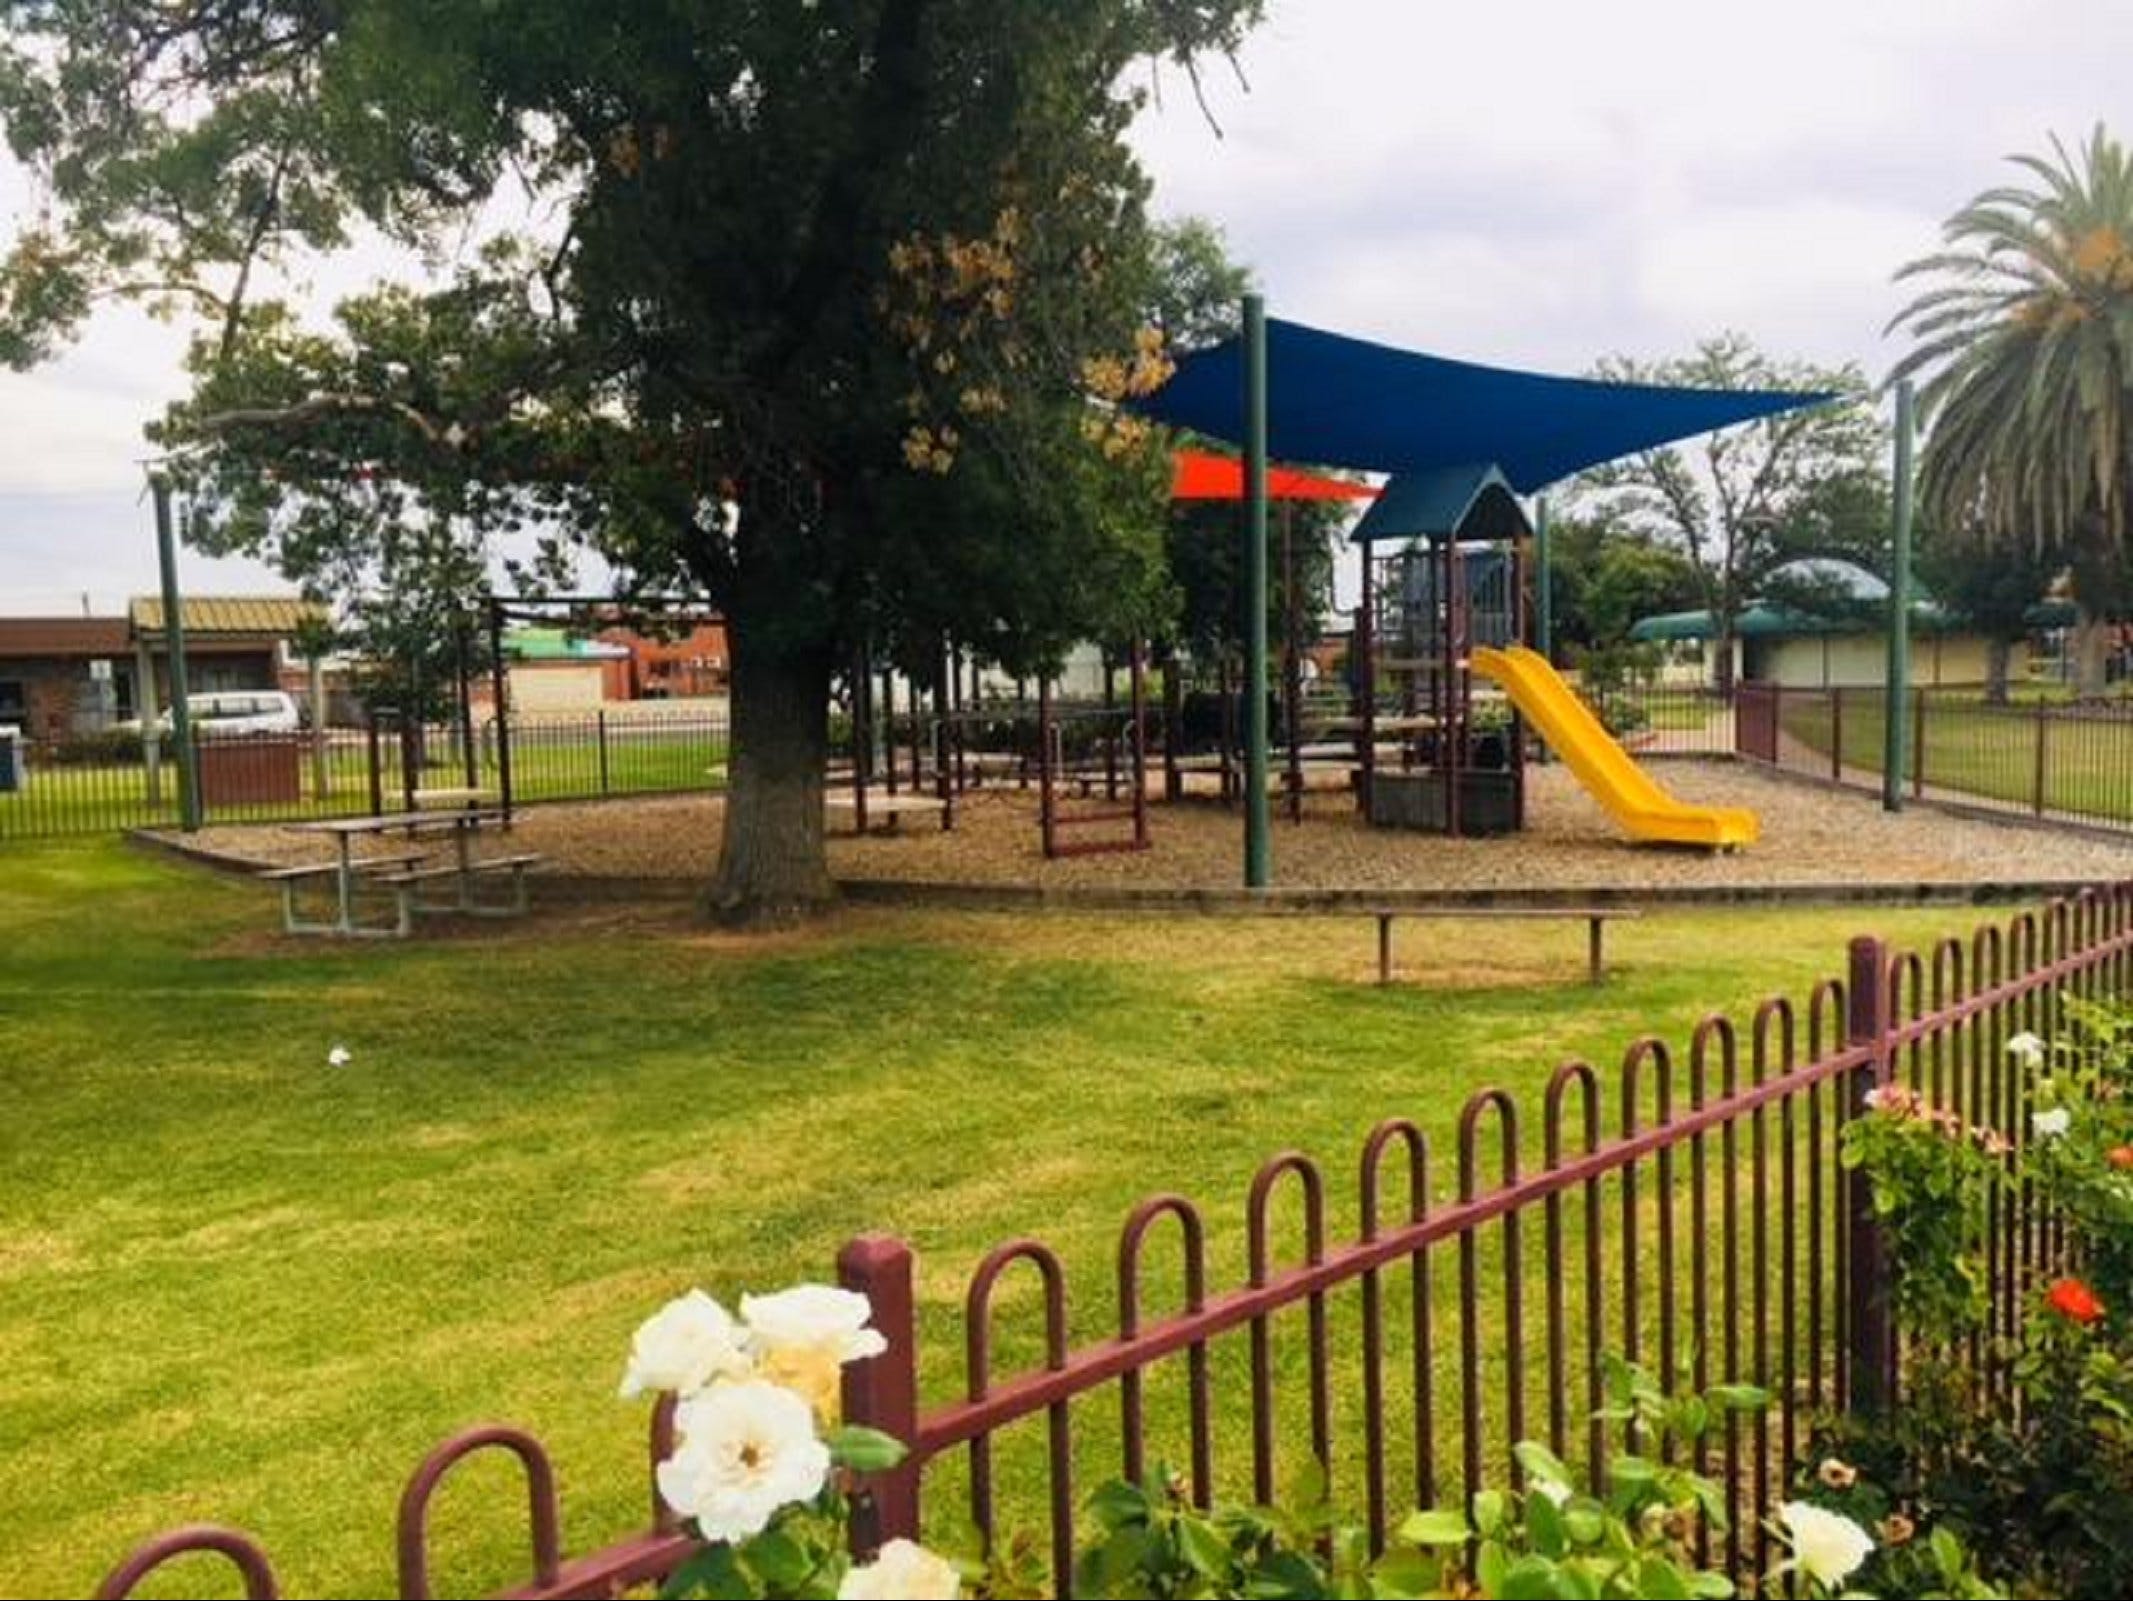 Cobram Mivo Park and Playground - Find Attractions